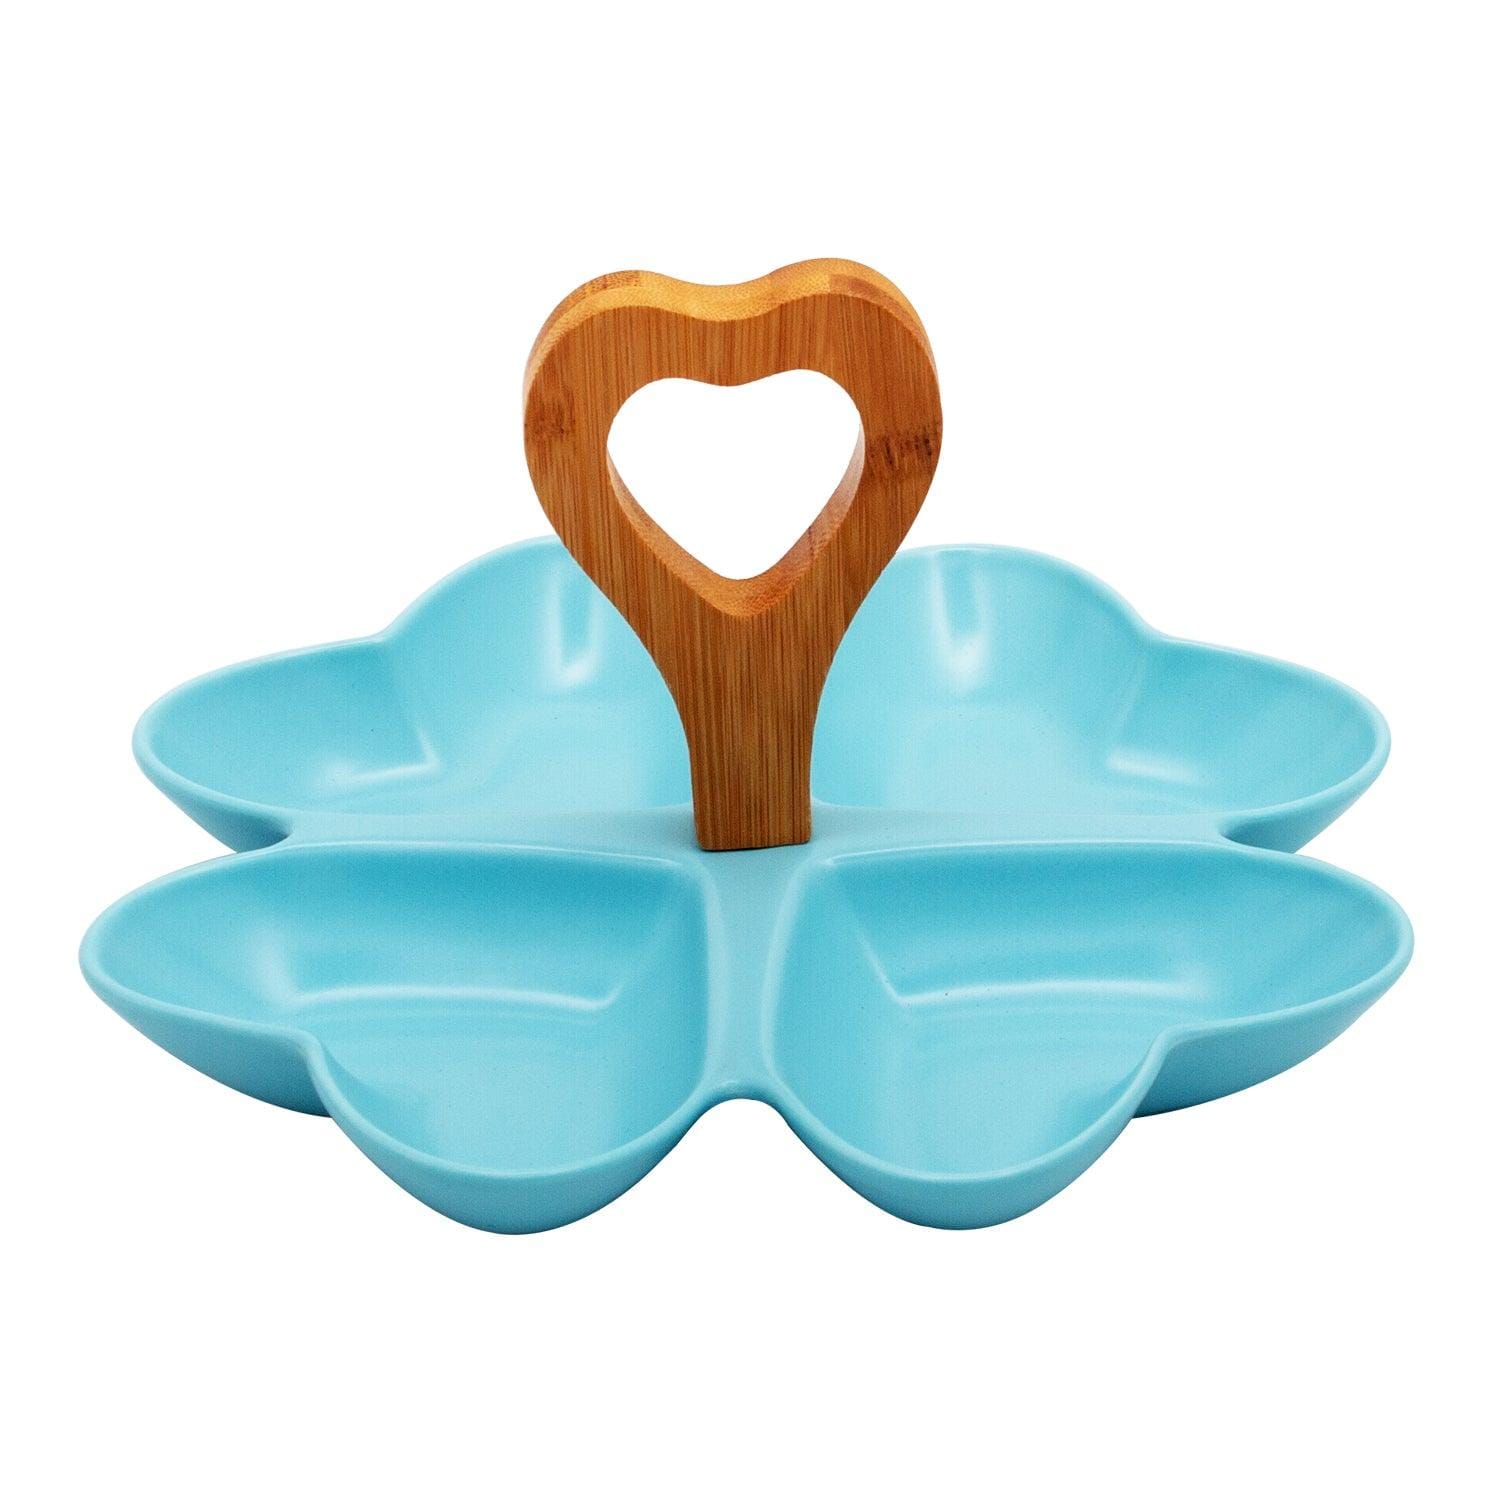 4 Compartment Hearty Blue Ceramic Serving Platter with Wooden Handle